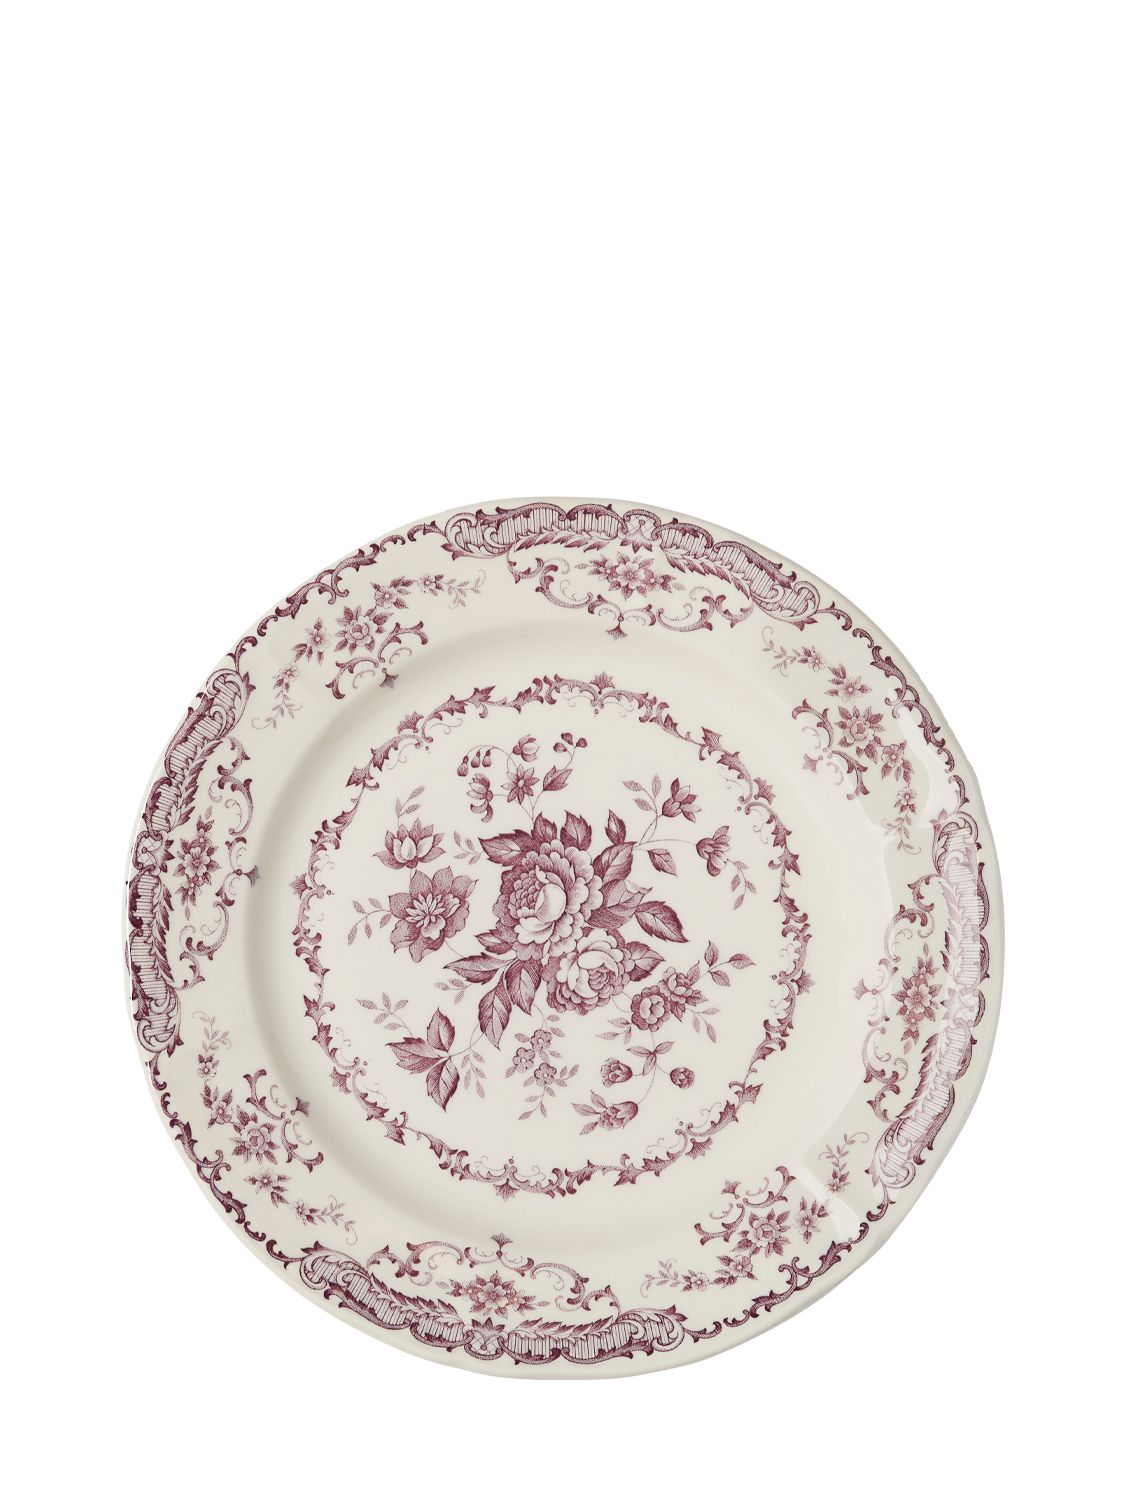 Bitossi Home Set Of 6 Dinner Plates In White,violet